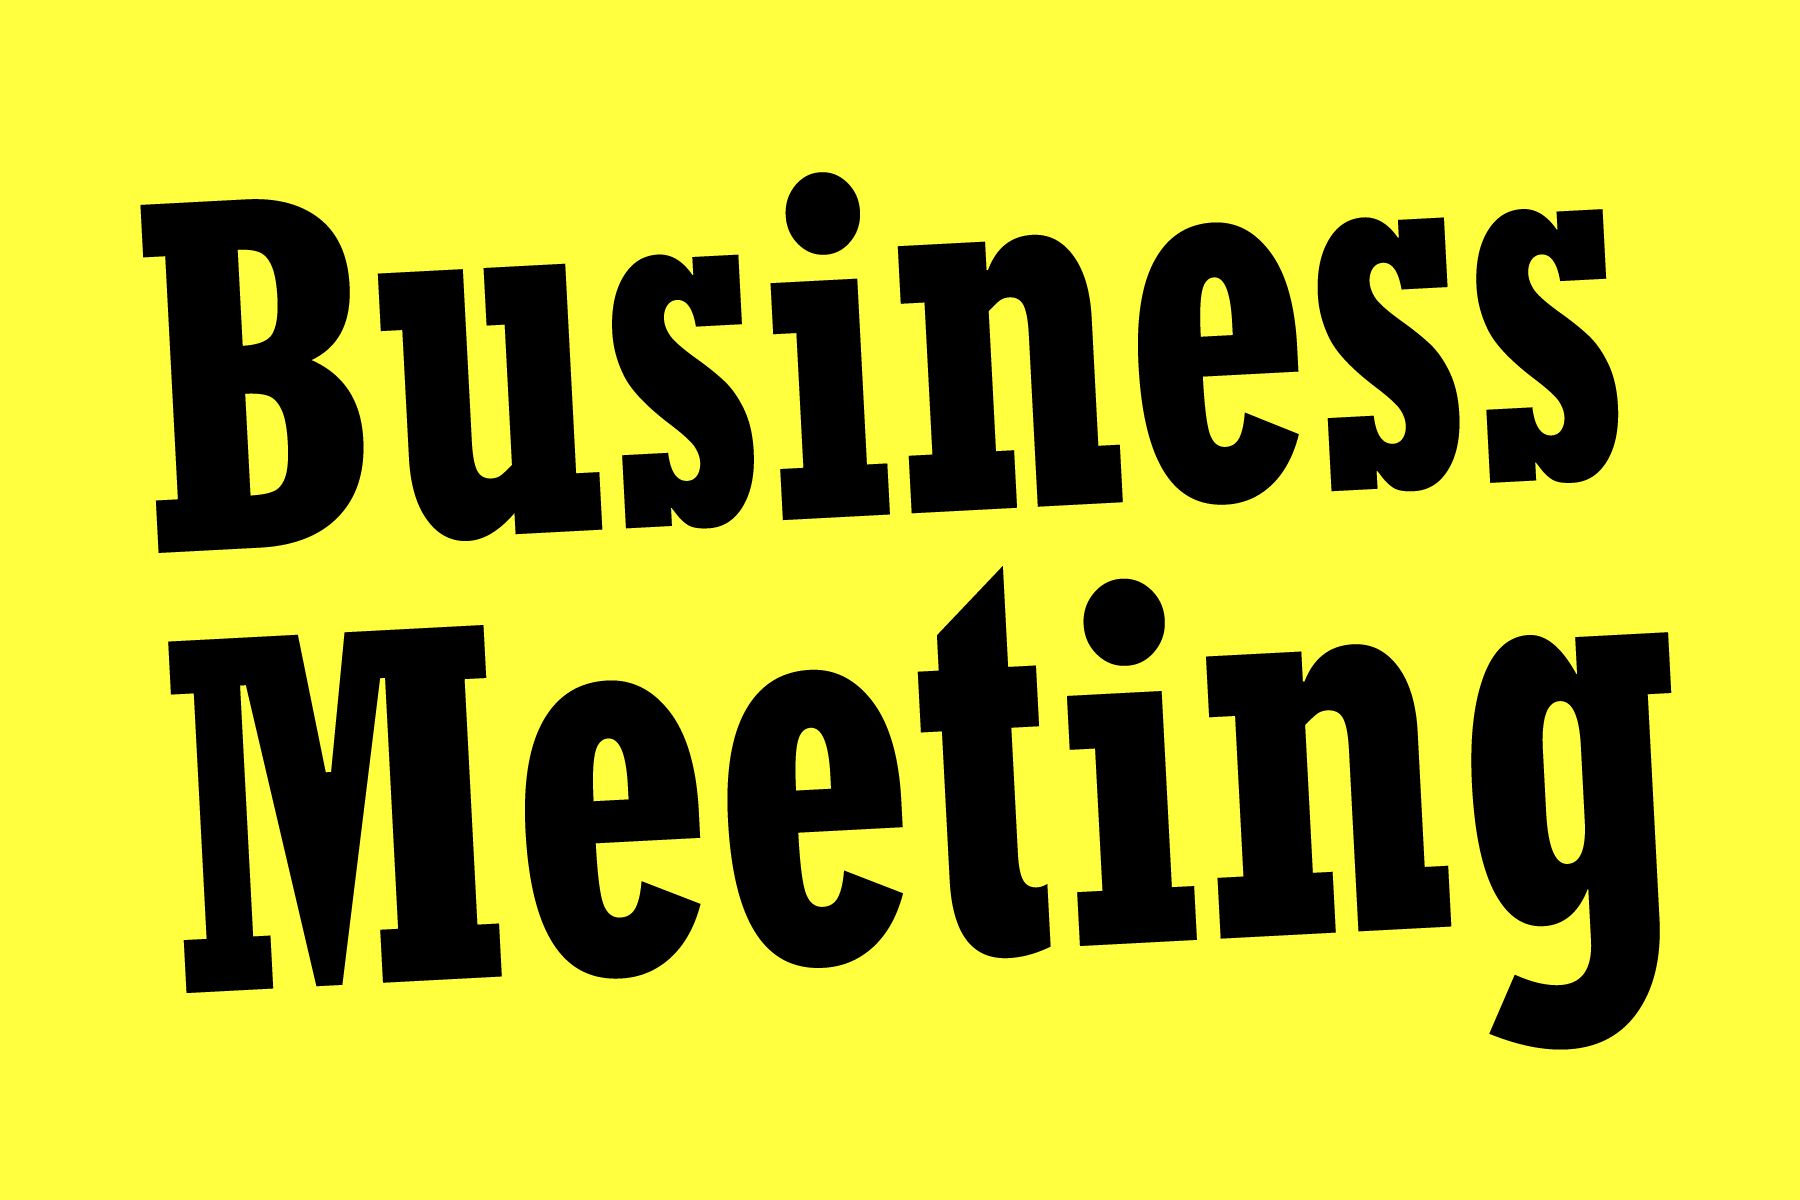 annual business meeting